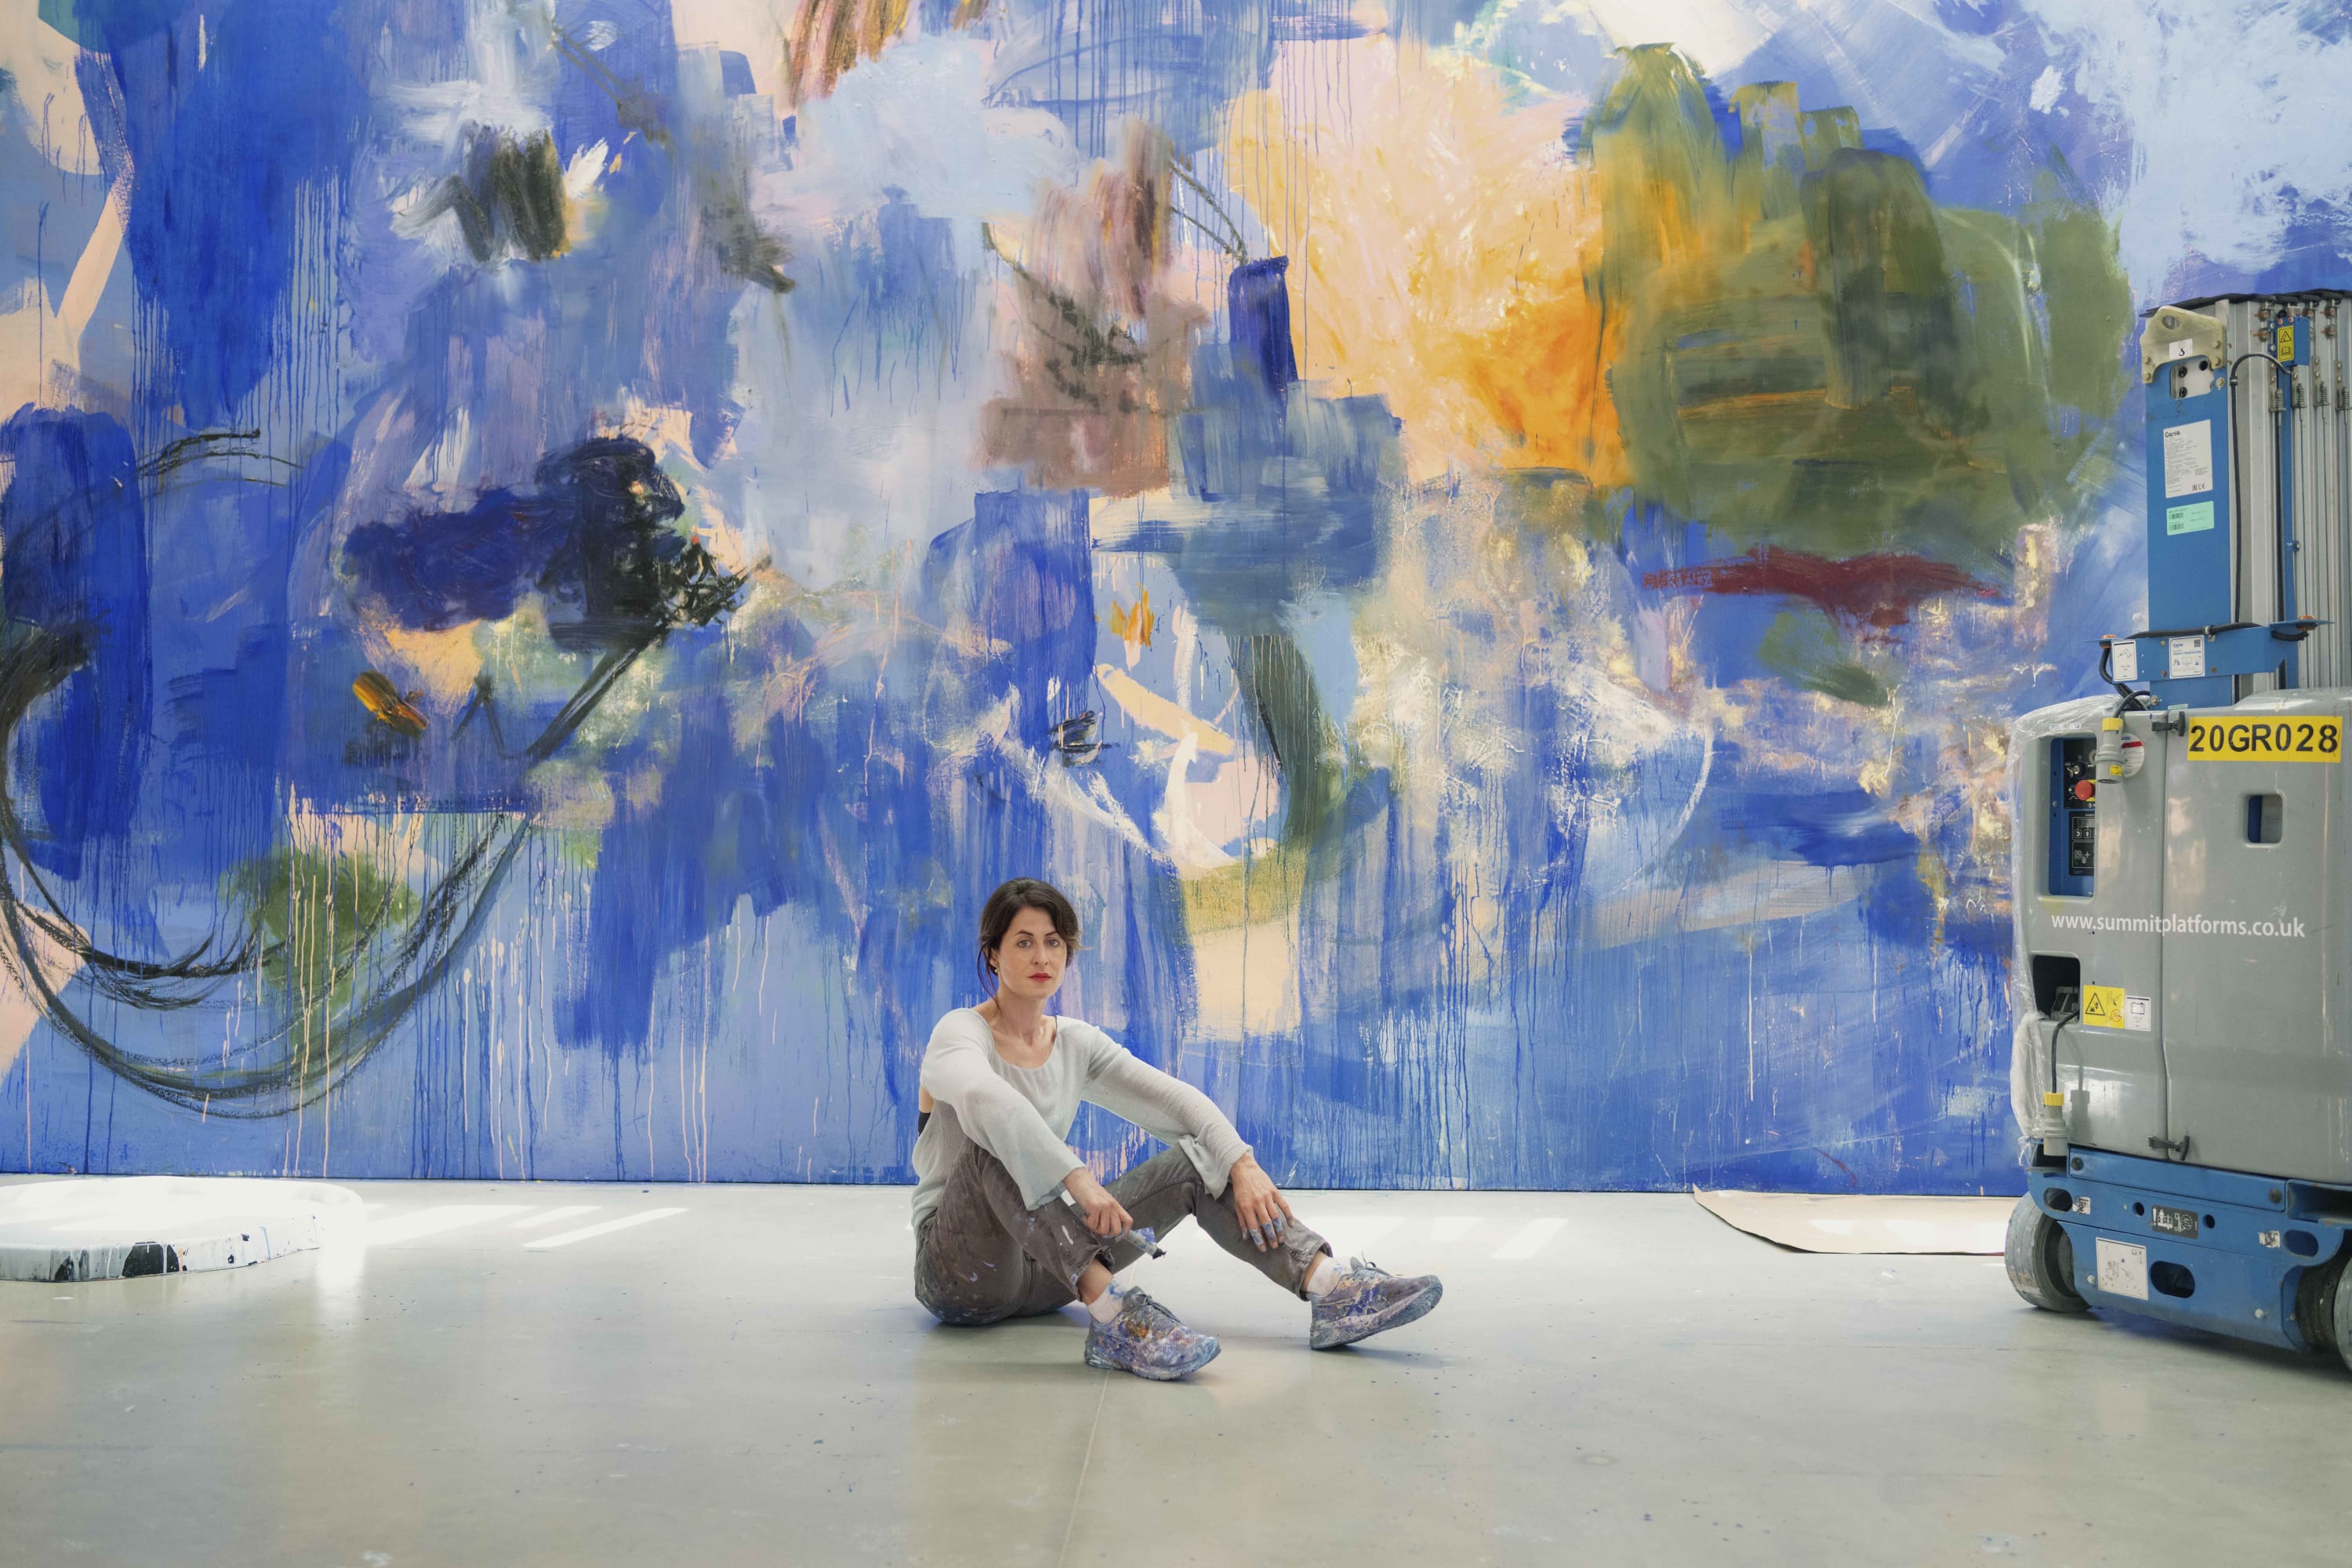 Megan Rooney's Lyrical Abstractions at Kettle's Yard Here’s How She Brings Them to Life